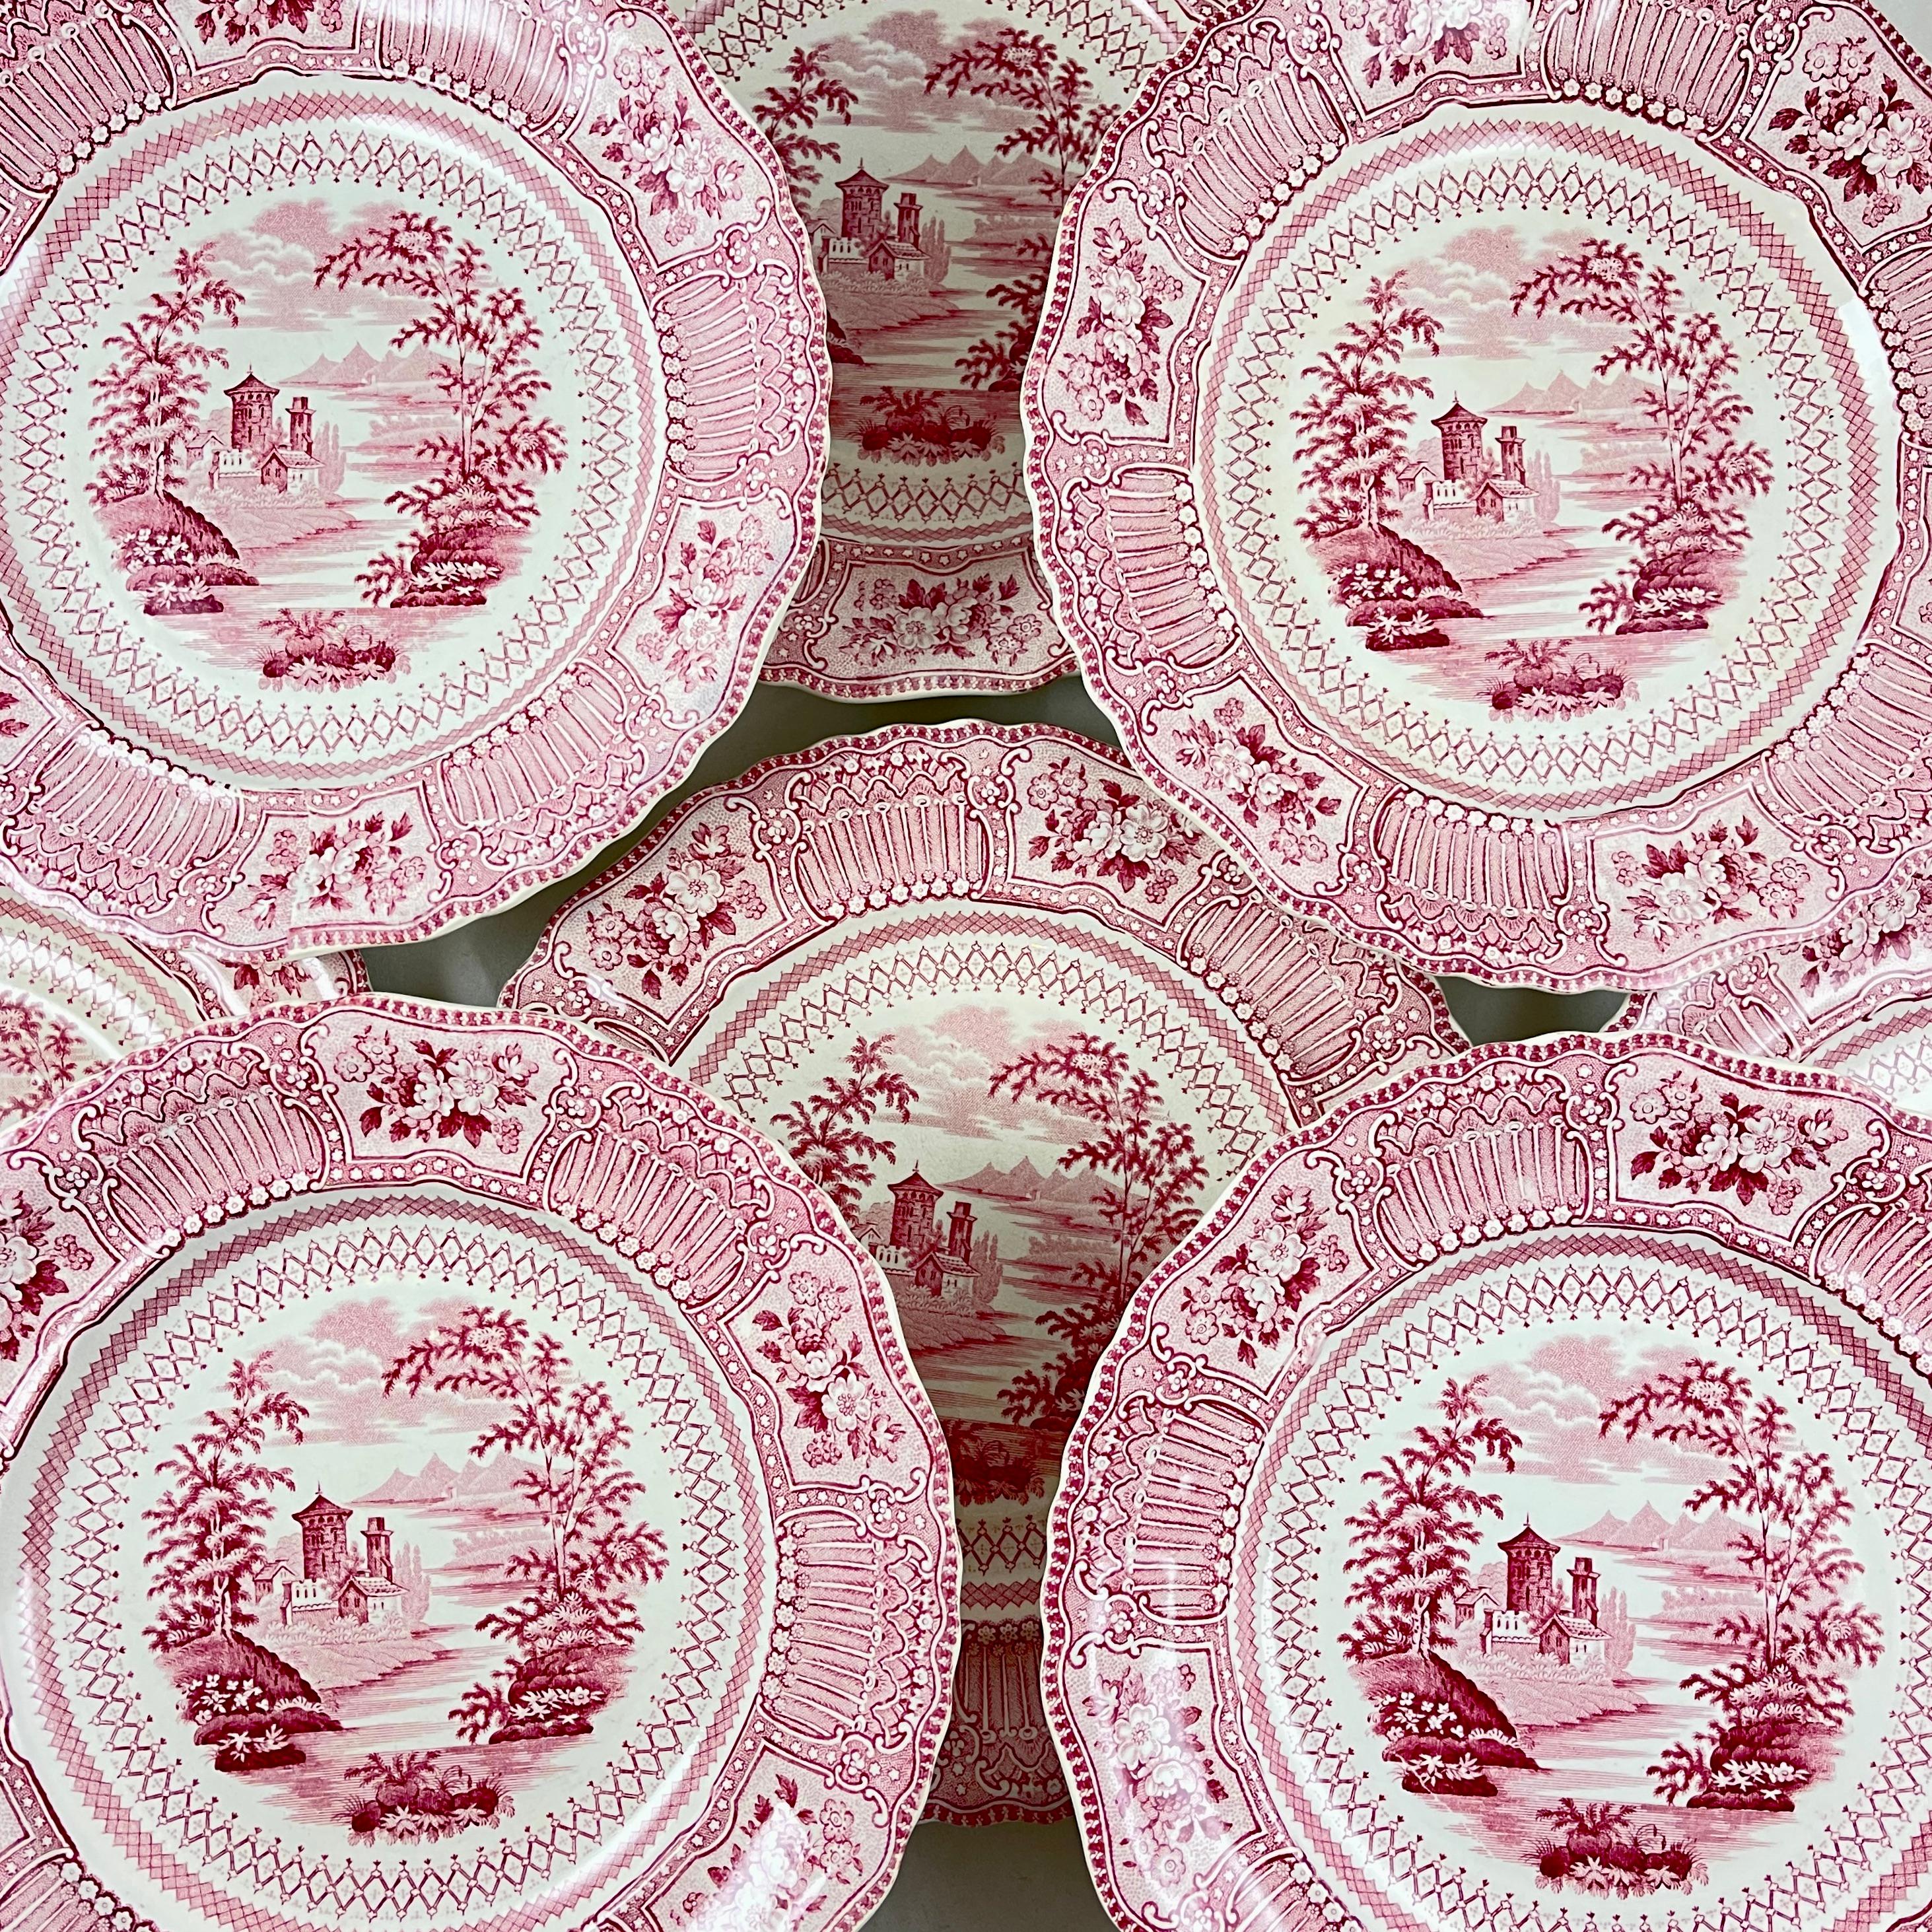 A set of eight transfer printed plates, the Cologne pattern, Ralph Stevenson & Son, Coleridge, Staffordshire England, circa 1810-1835.

A soft pink on white, the scalloped rimmed plates show a romantic landscape with a central image of a castle on